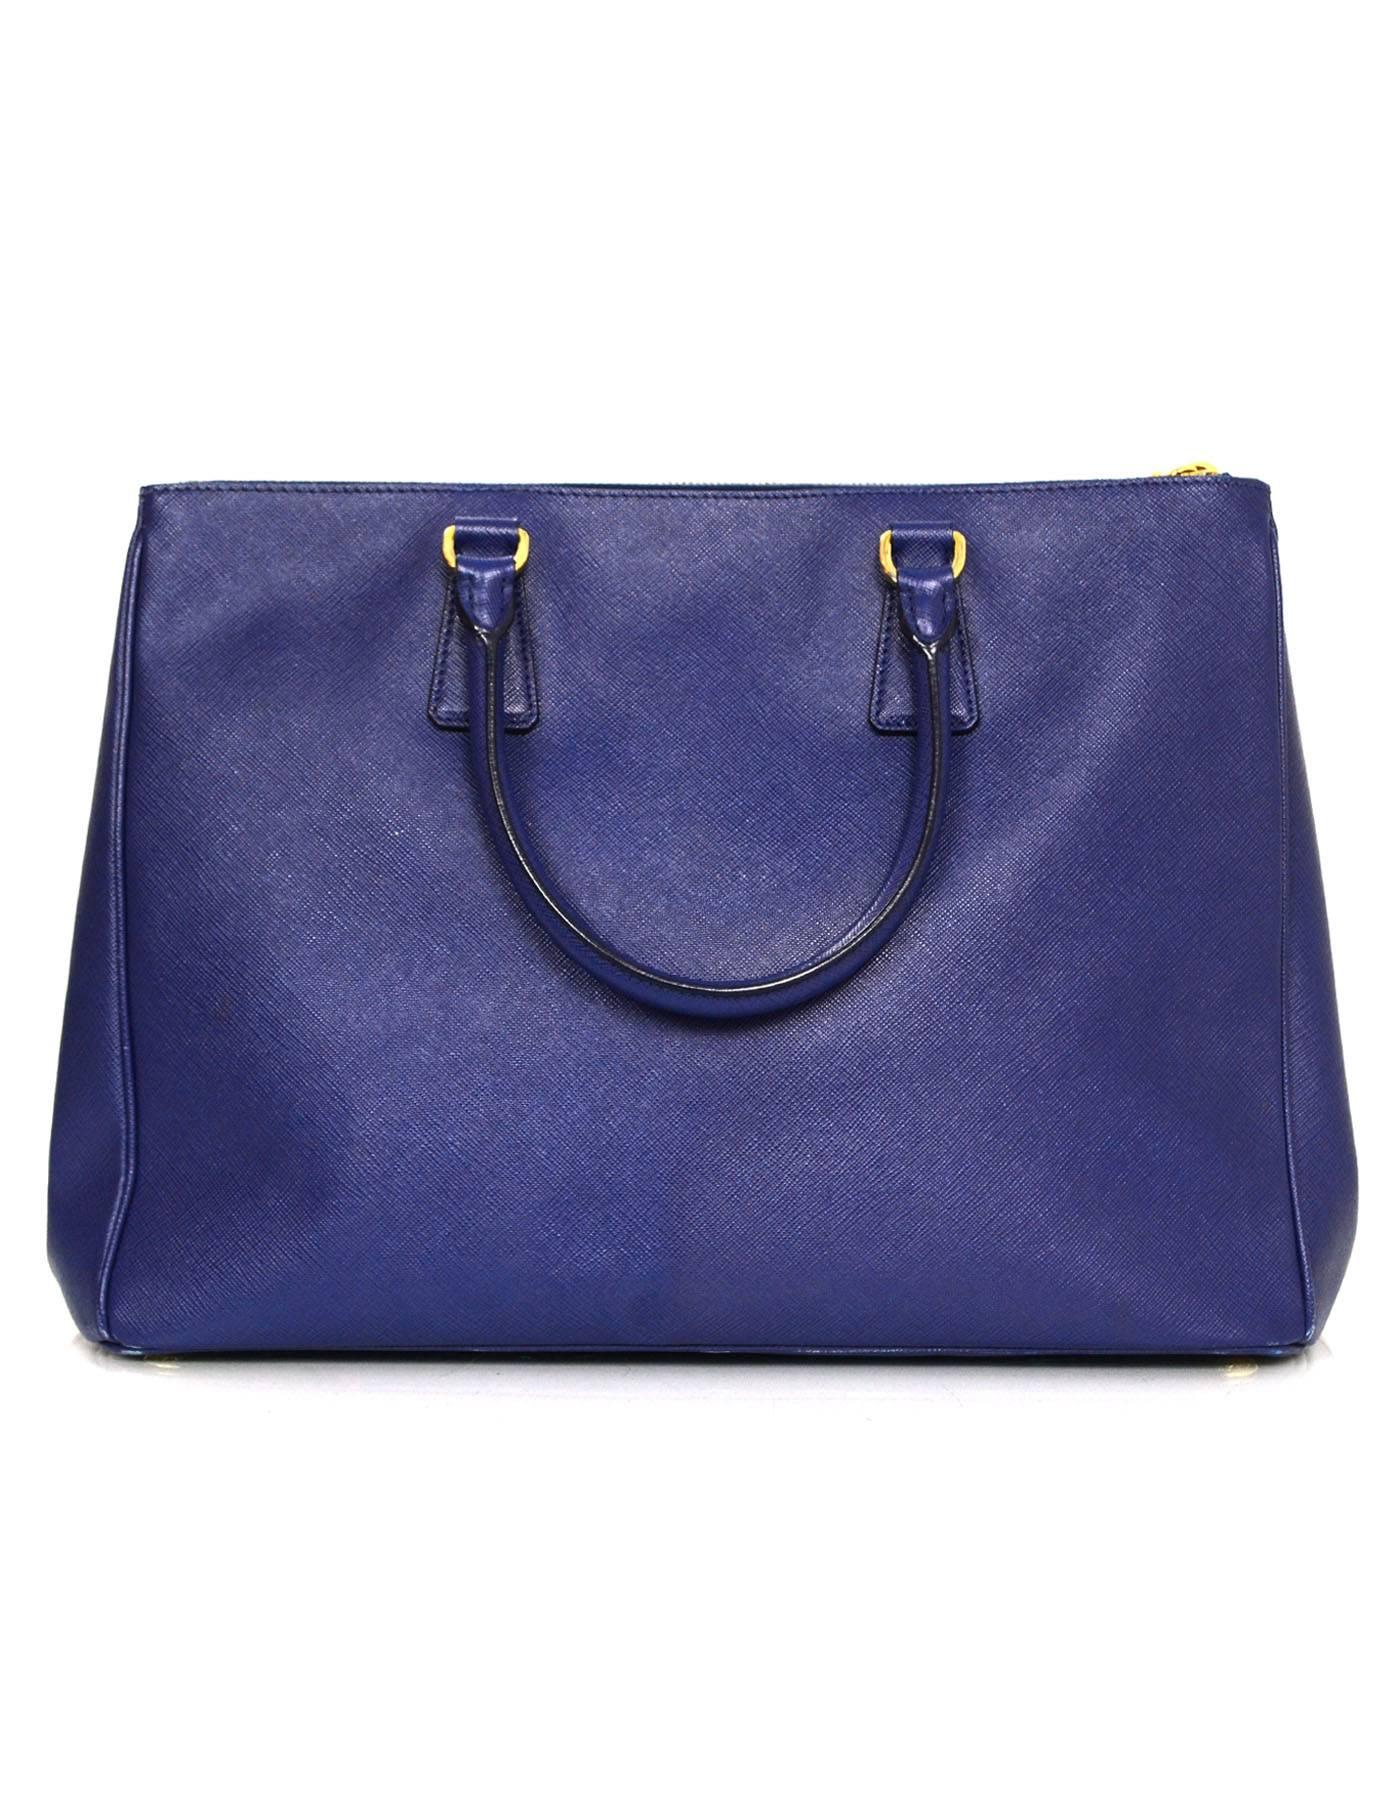 Women's Prada Blue Saffiano Lux Double Zip Tote Bag with GHW